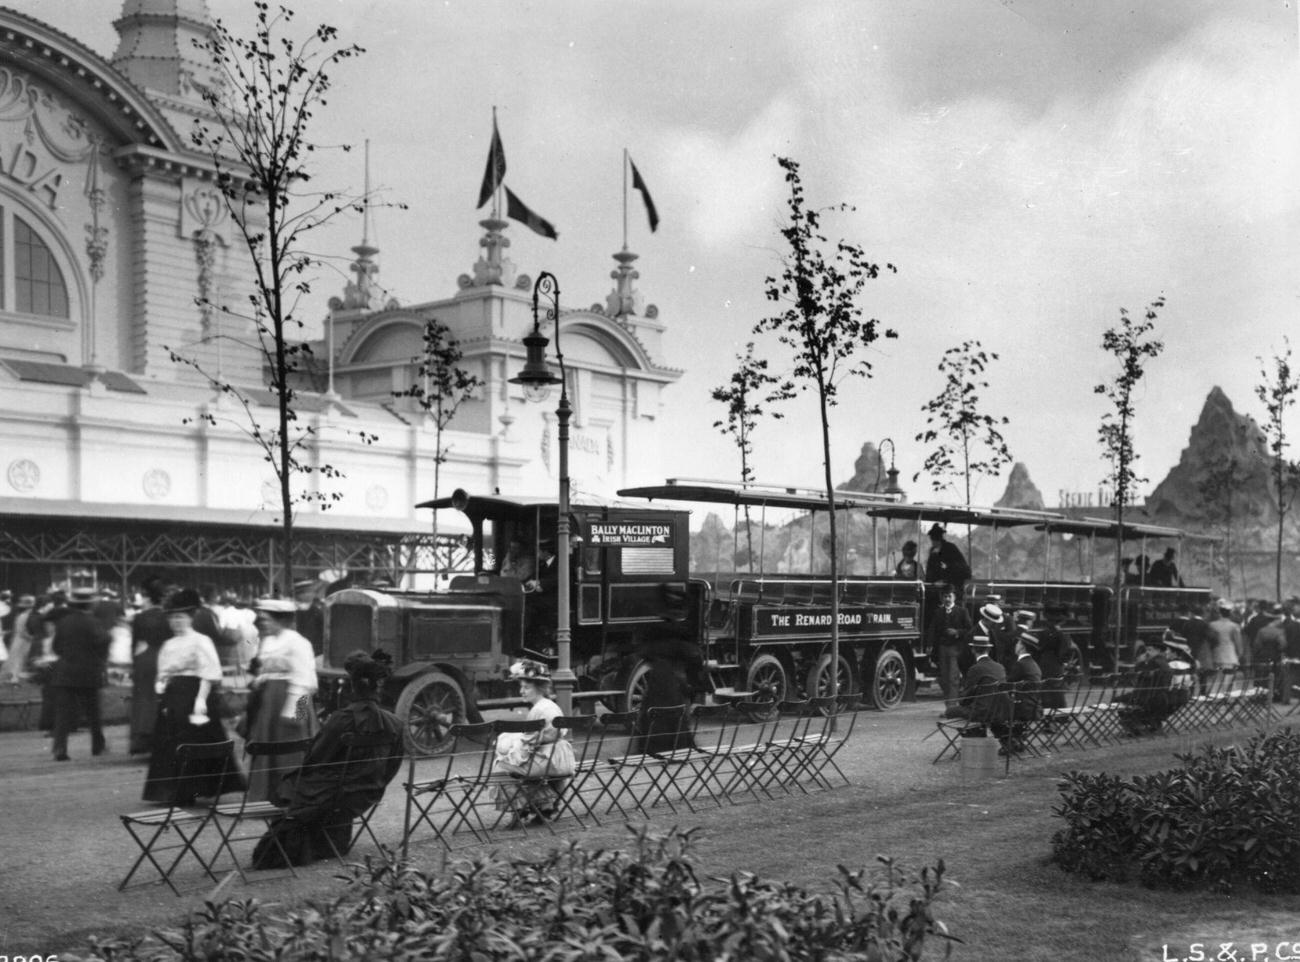 Scene at the 1908 Franco-British Exhibition with a locomotive in the foreground.